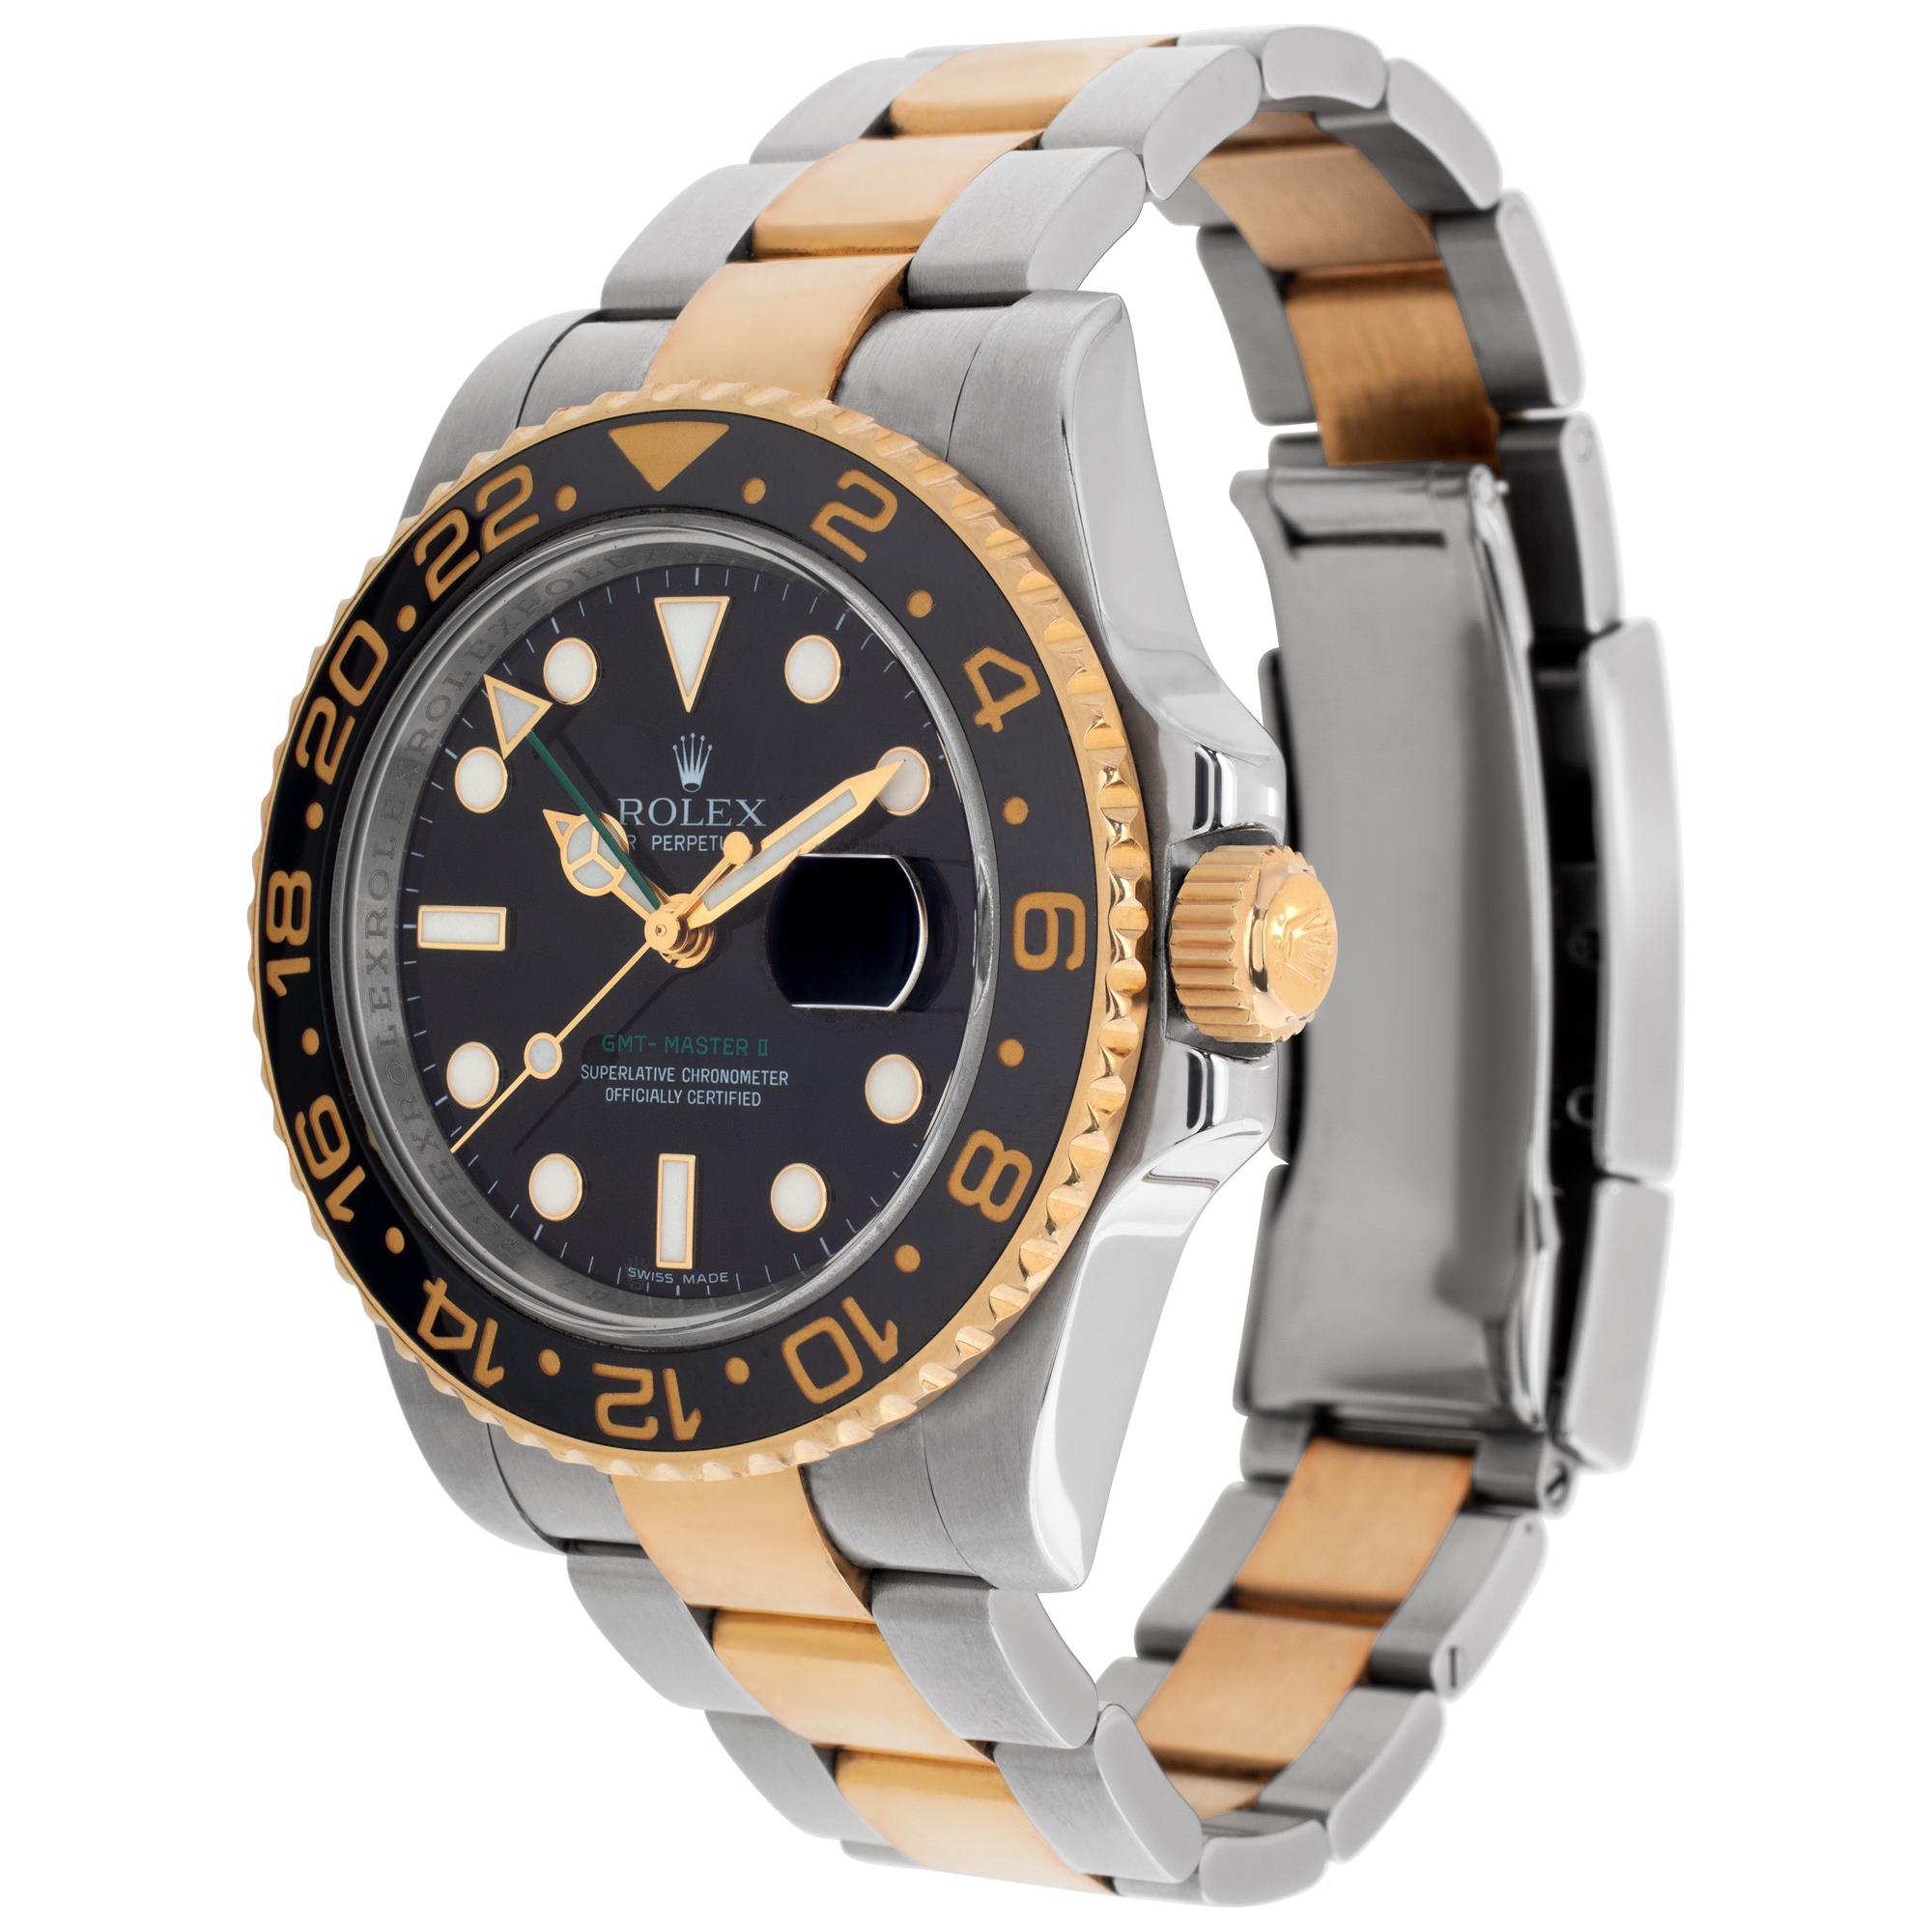 Rolex GMT-Master II in 18k yellow gold & stainless steel. Auto. 40 mm case size. Complete, mint set, with box and papers. Ref 116713. Circa 2008. **Bank Wire Only At This Price** Fine Pre-owned Rolex Watch. Certified preowned Sport Rolex GMT-Master